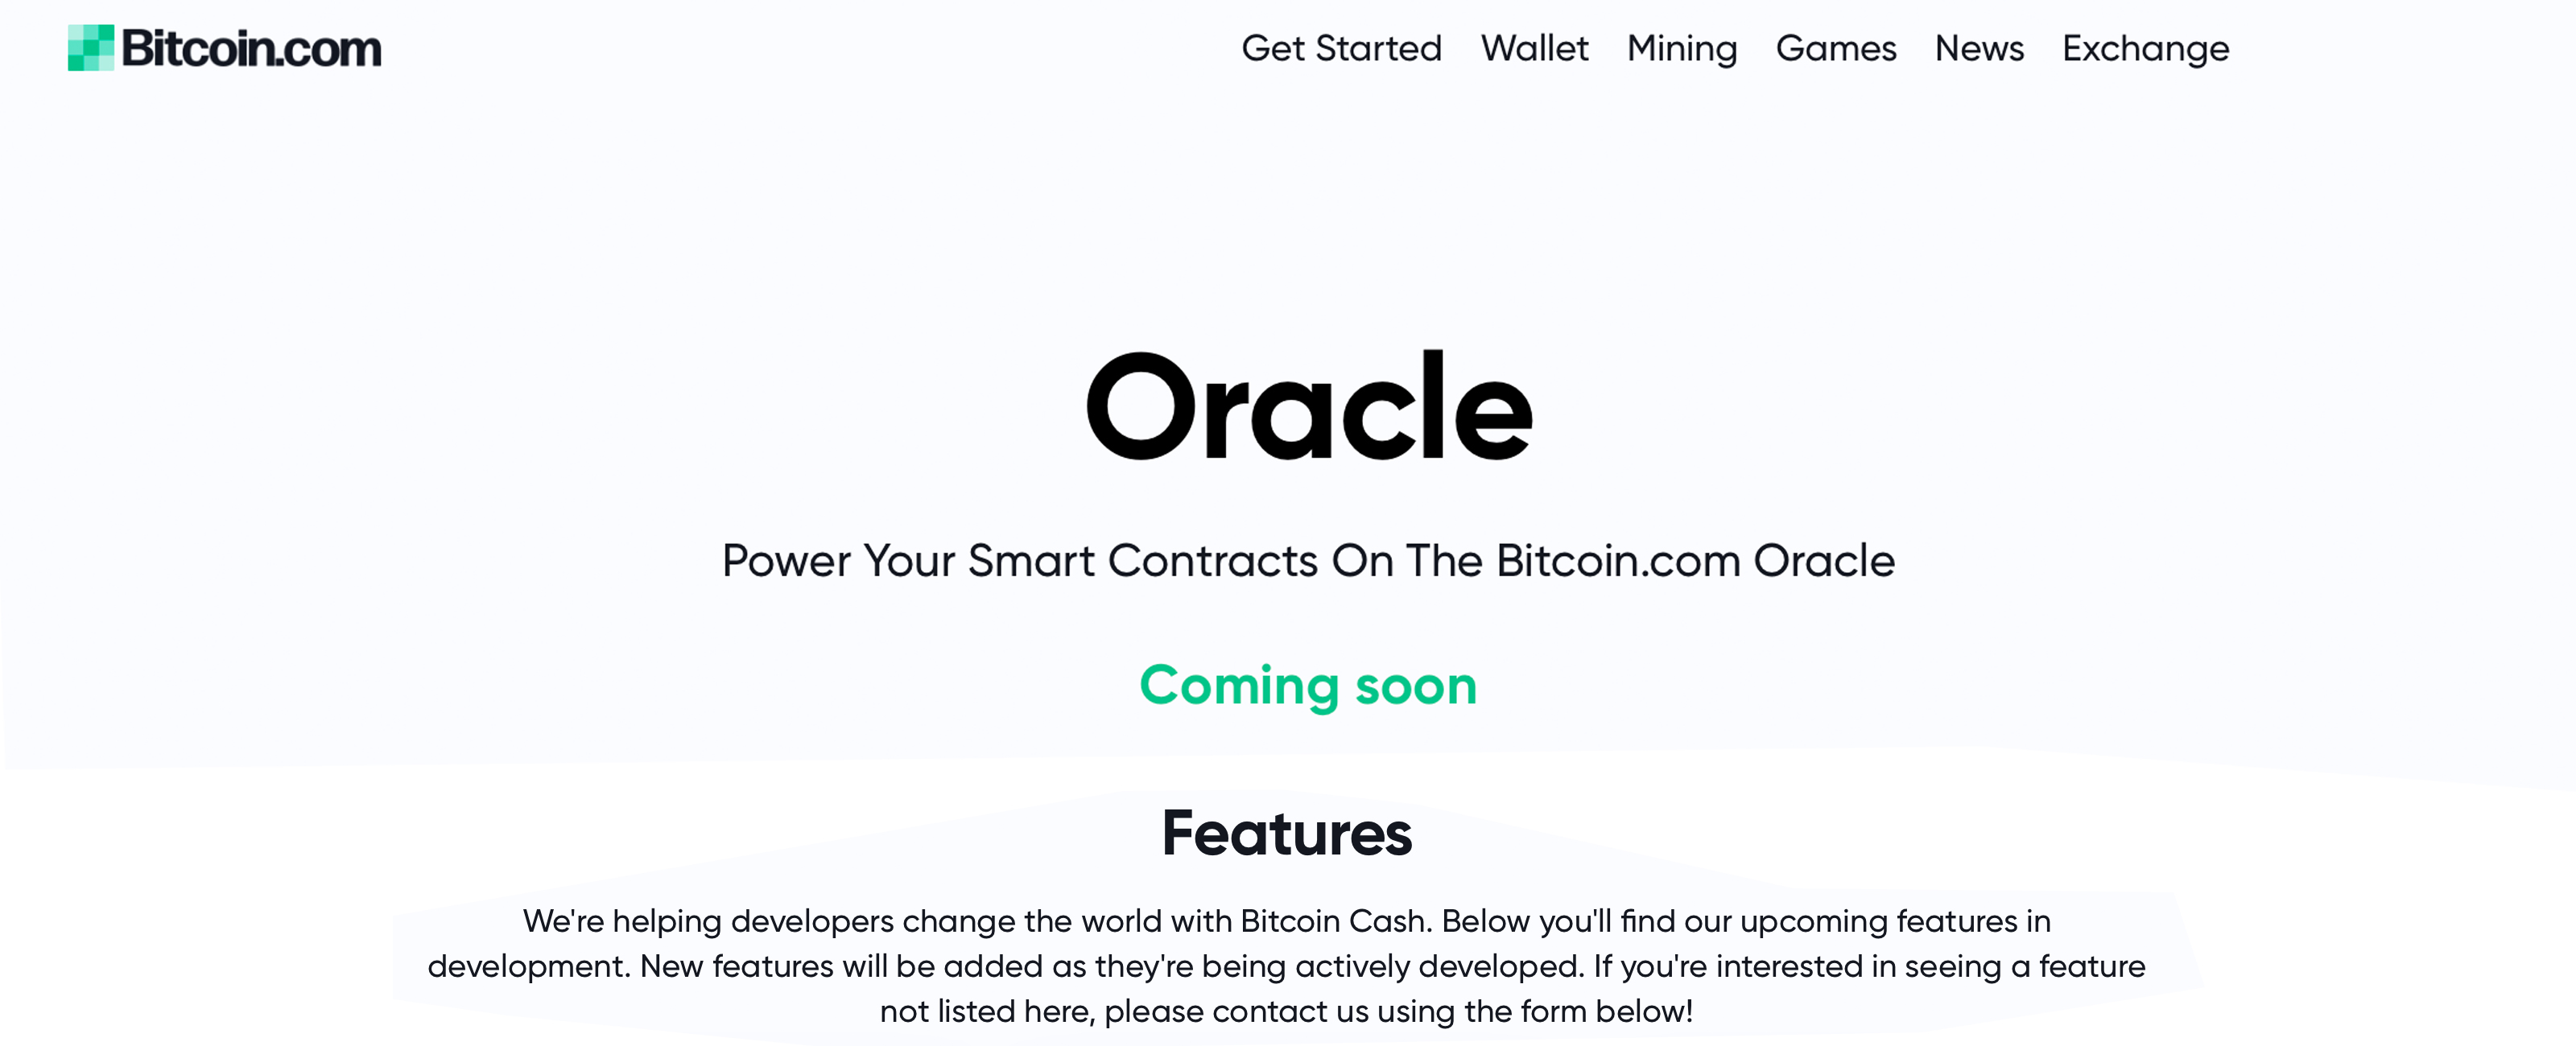 Software Engineer Reveals Oracle Creation Platform for Bitcoin Cash